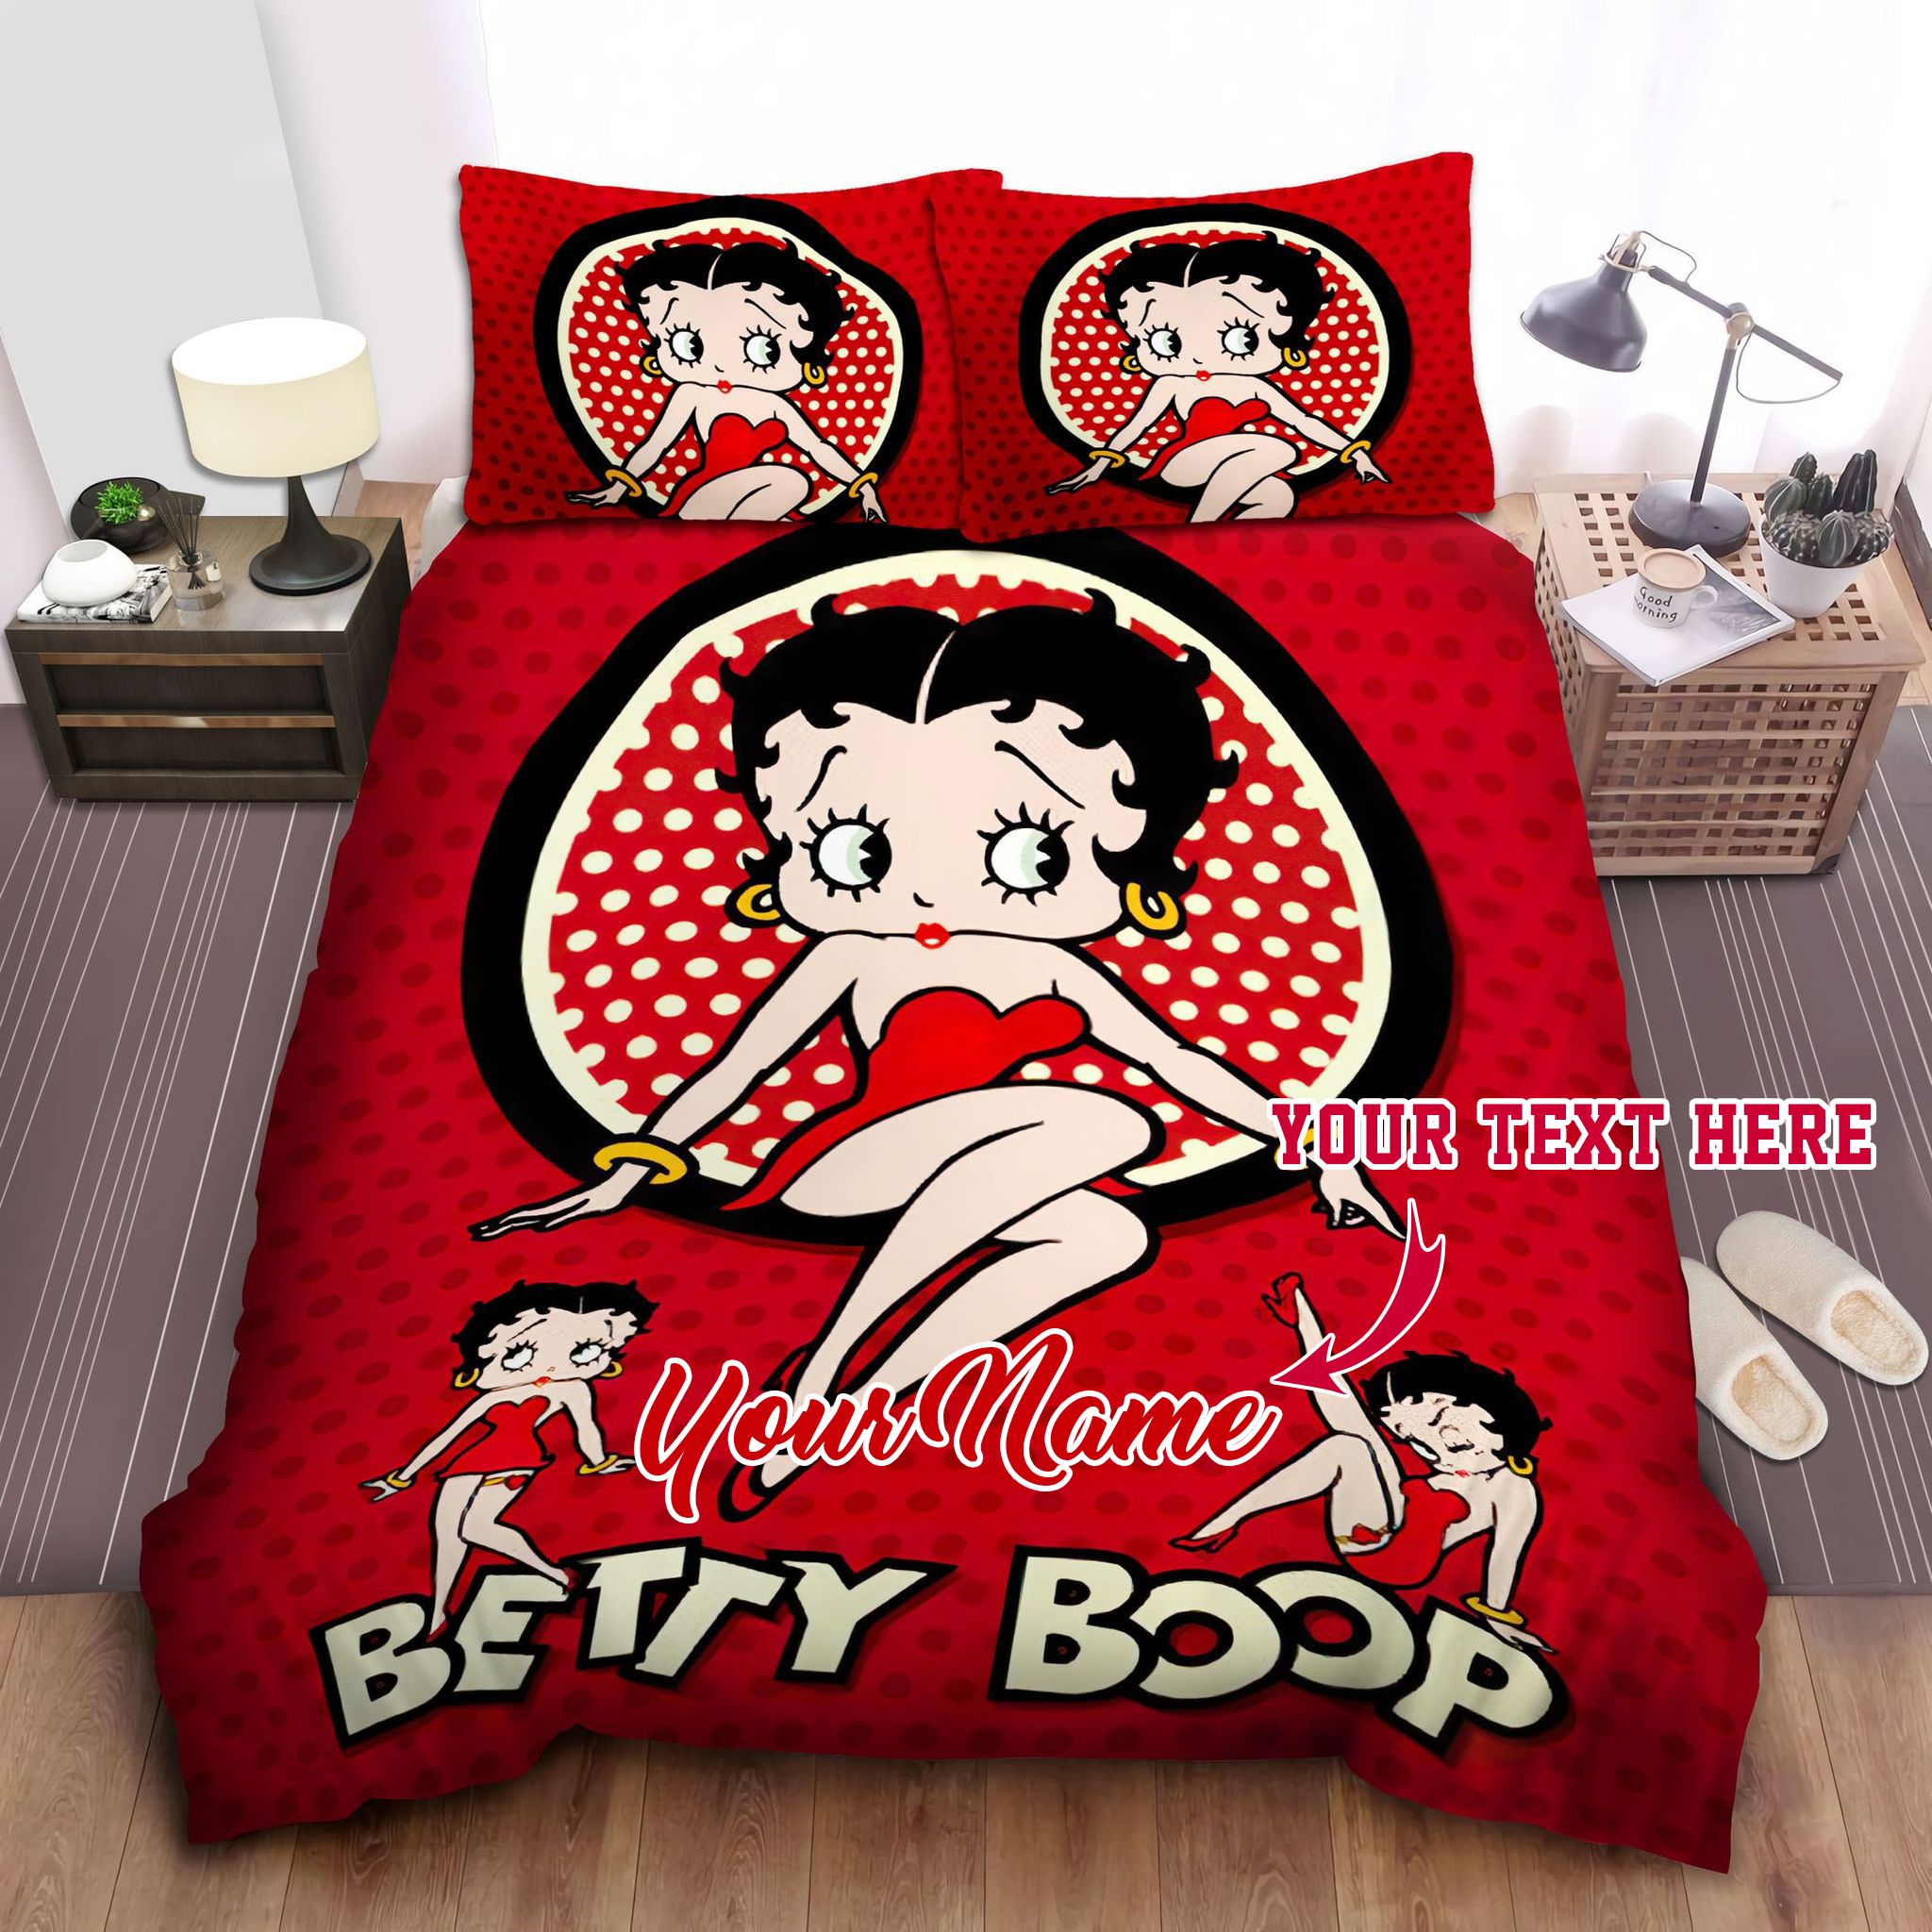 Betty Boop Bed Sheets Spread Film Personalized Custom Bedding Sets King Queen Twin Bedding Set